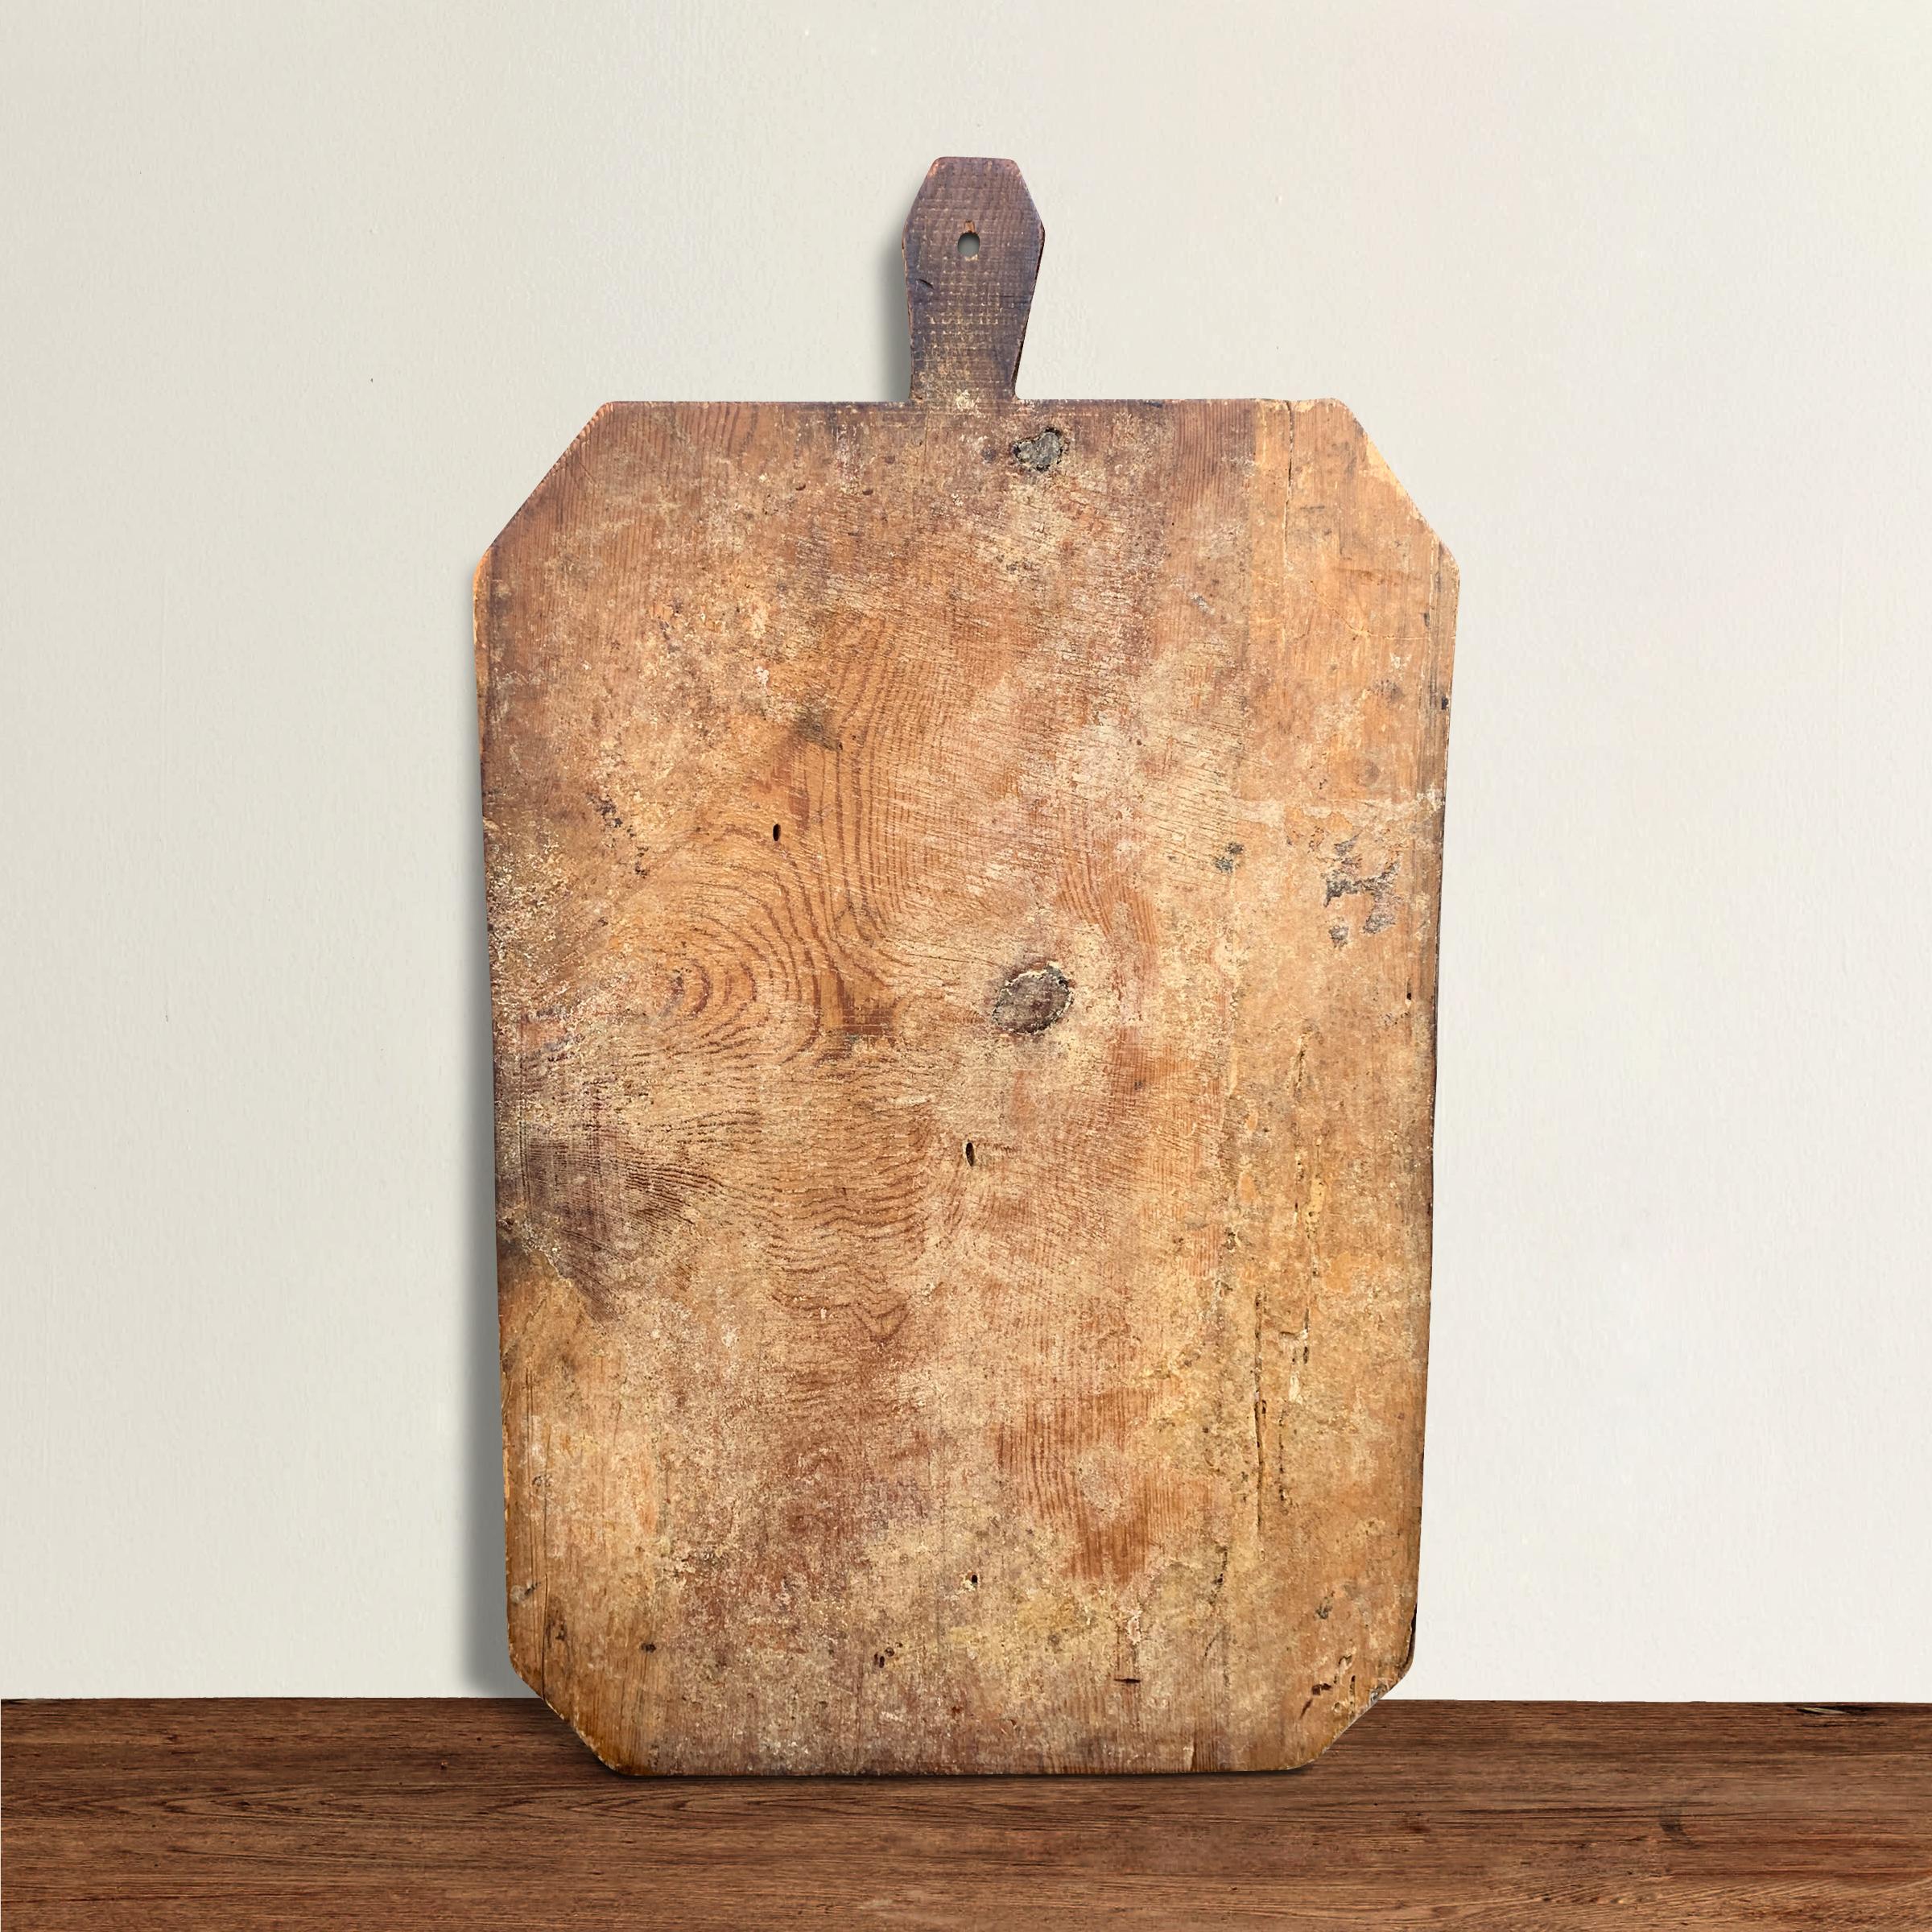 A wonderful early 20th century Italian pine breadboard with a fantastic patina from a hundred years of use. Perfect for serving cheese and charcuterie at your next fête, or the ever popular hot-chocolate board at your next winter gathering.